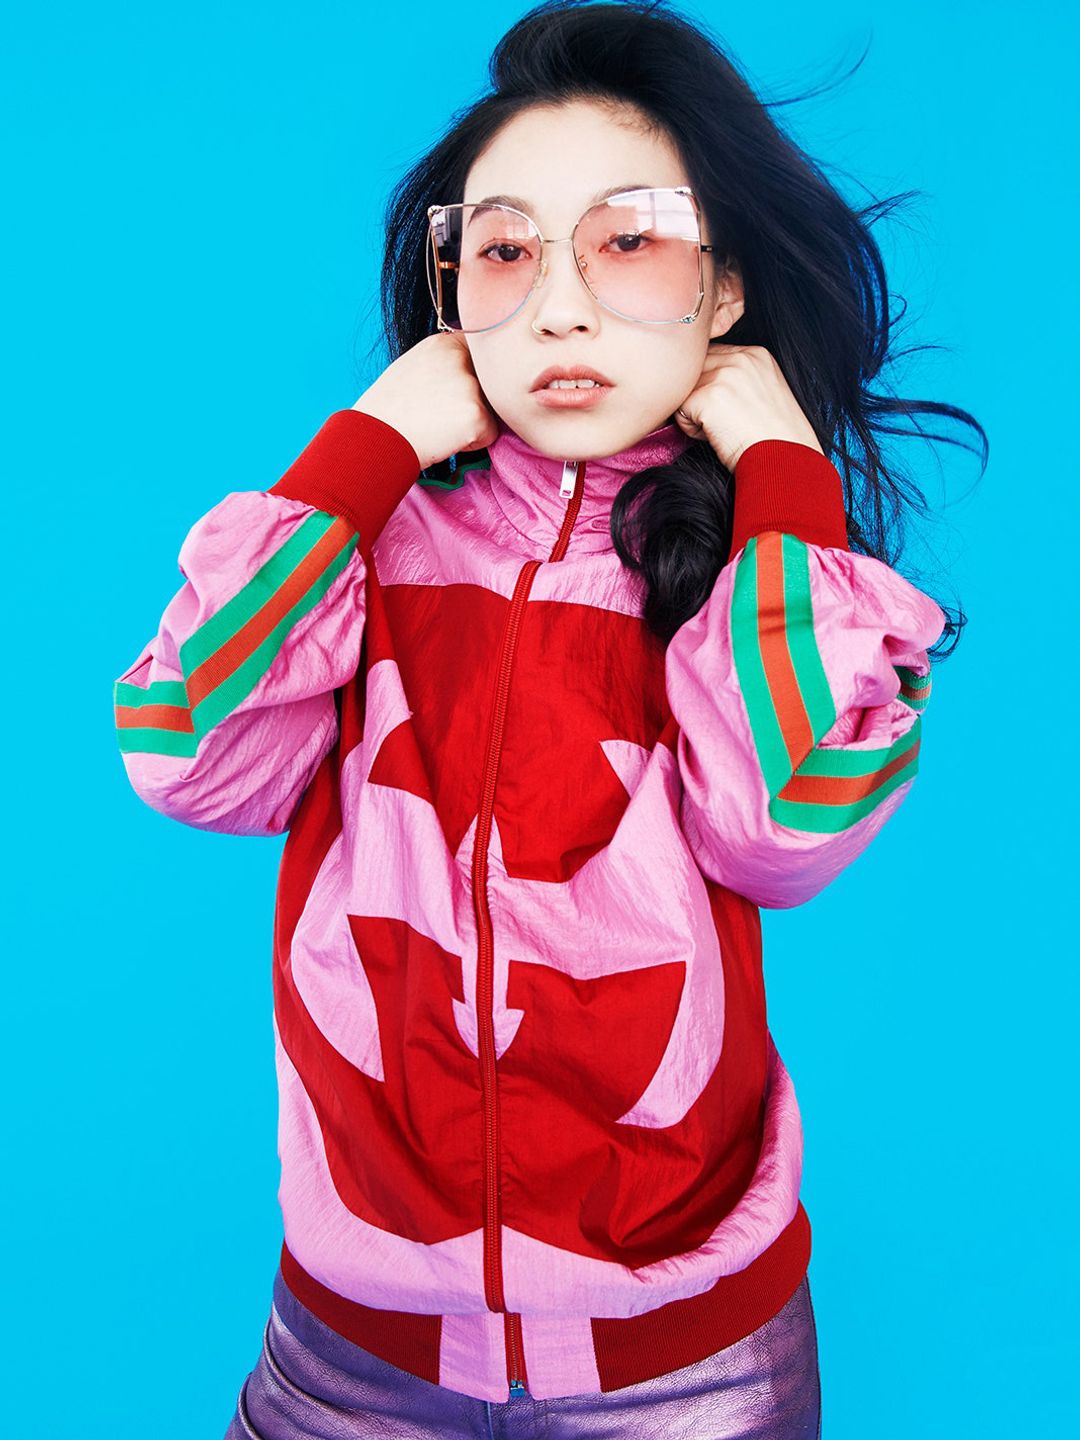 Awkwafina how did she became famous